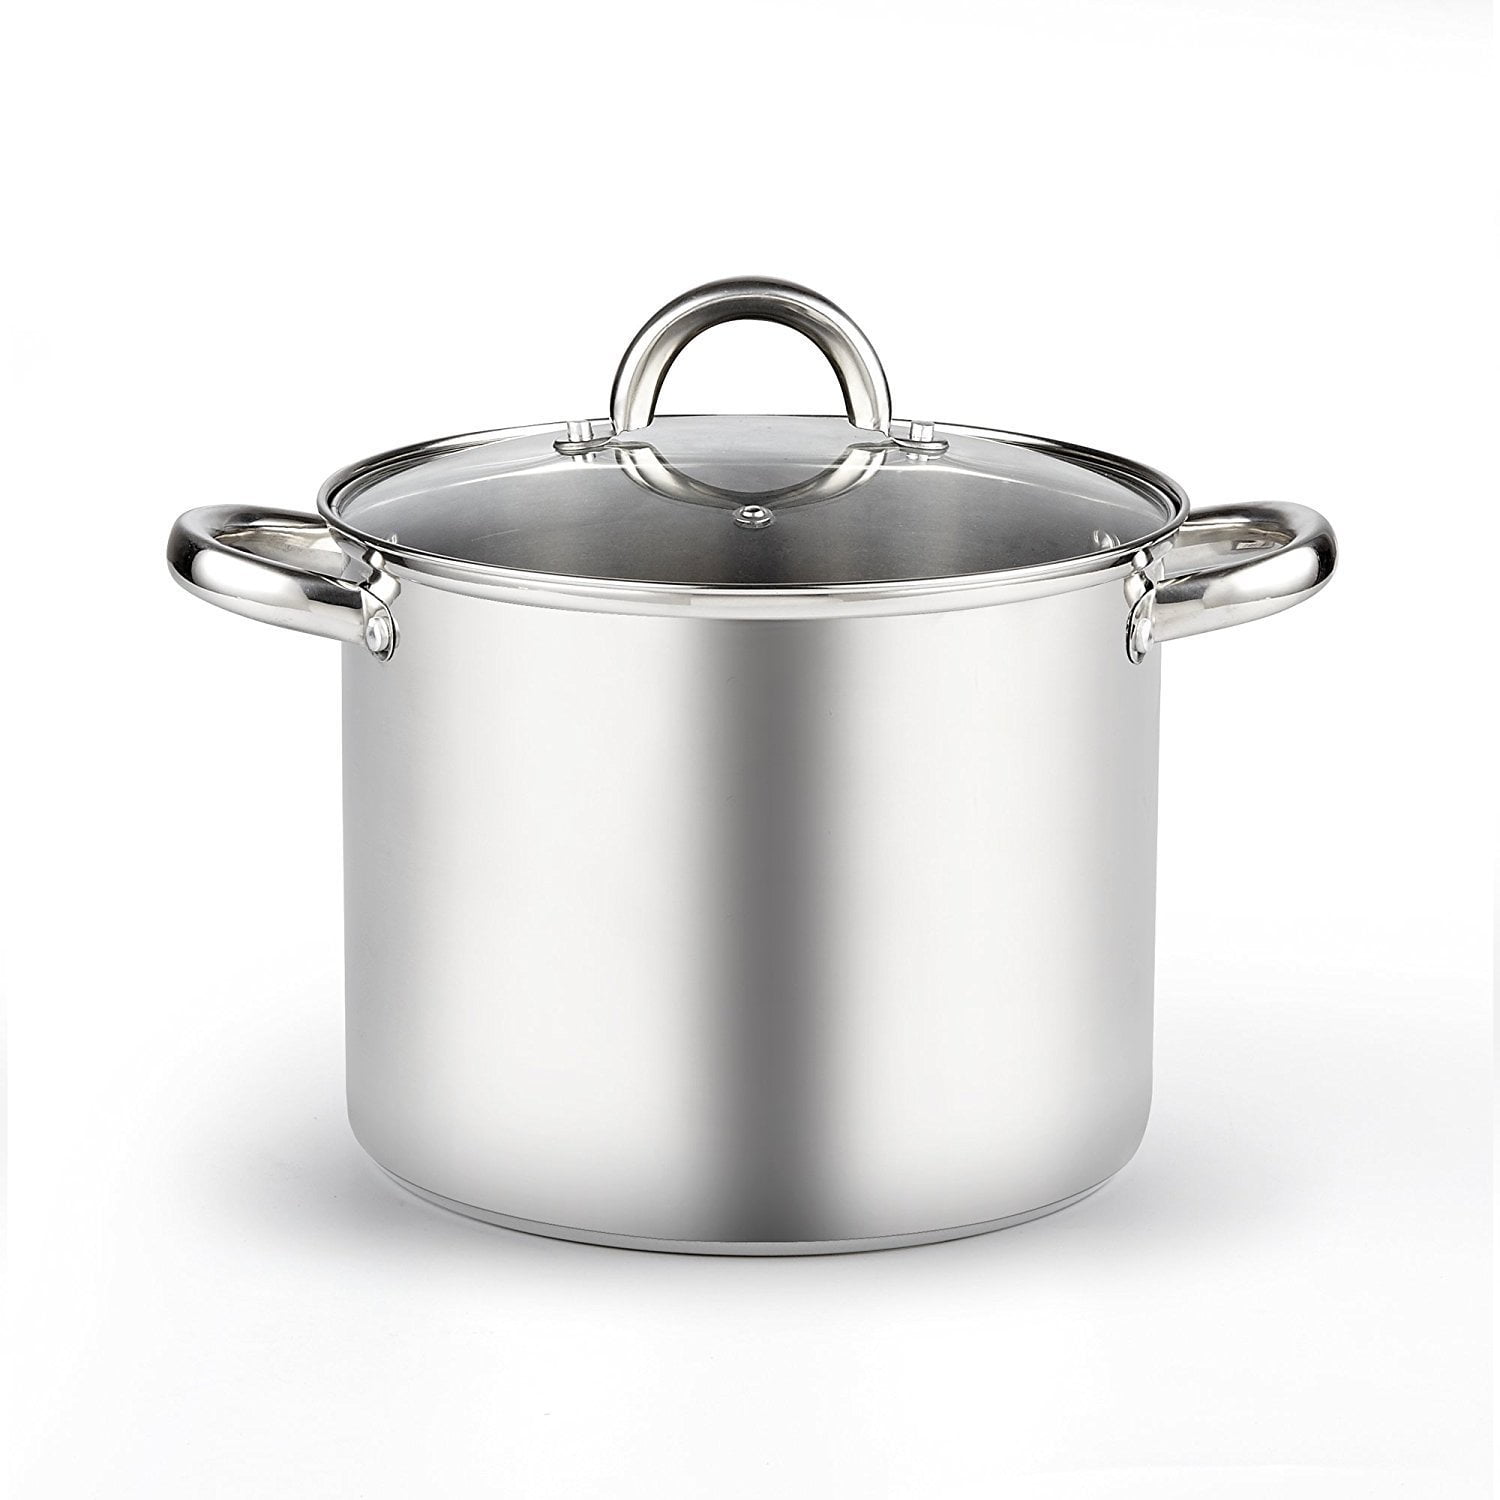 Cook N Home Basic 12 qt. Stainless Steel Stockpot with Lid 02728